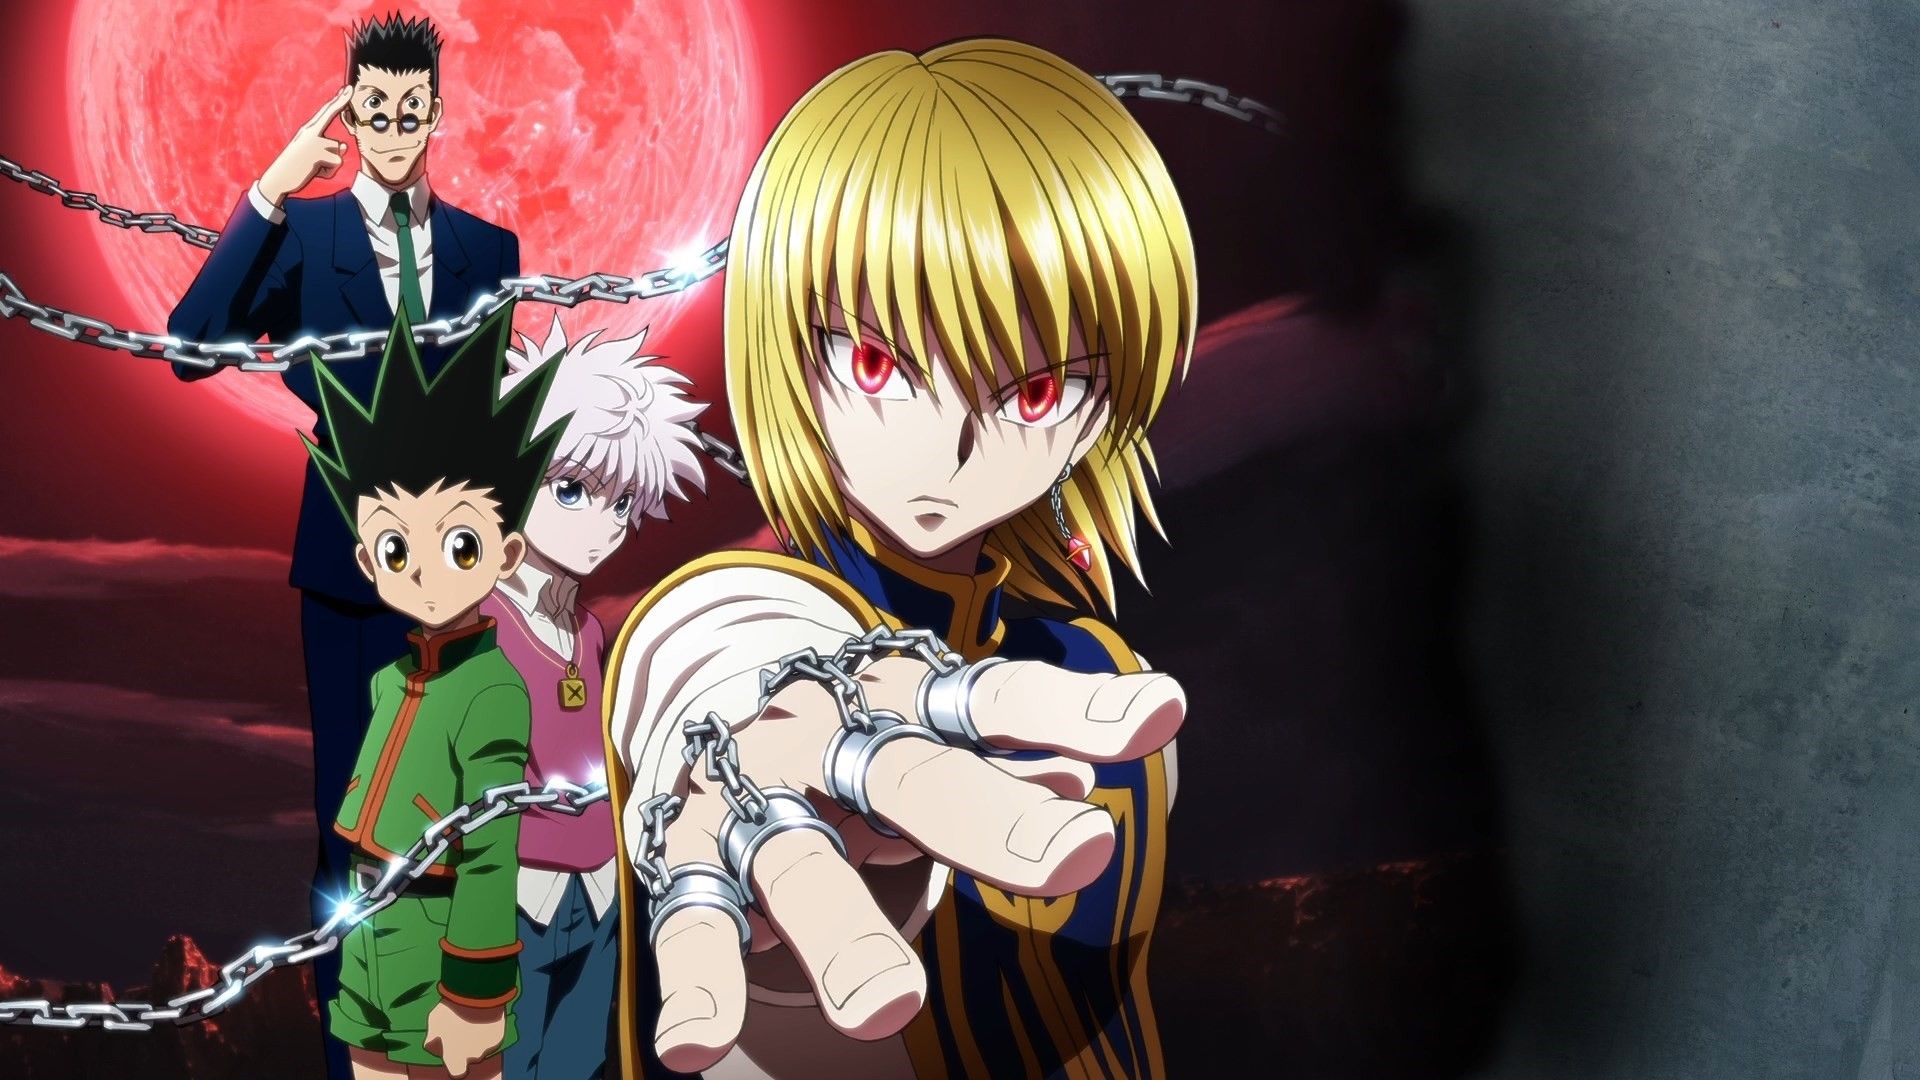 Aesthetic PC HxH Wallpapers - Wallpaper Cave